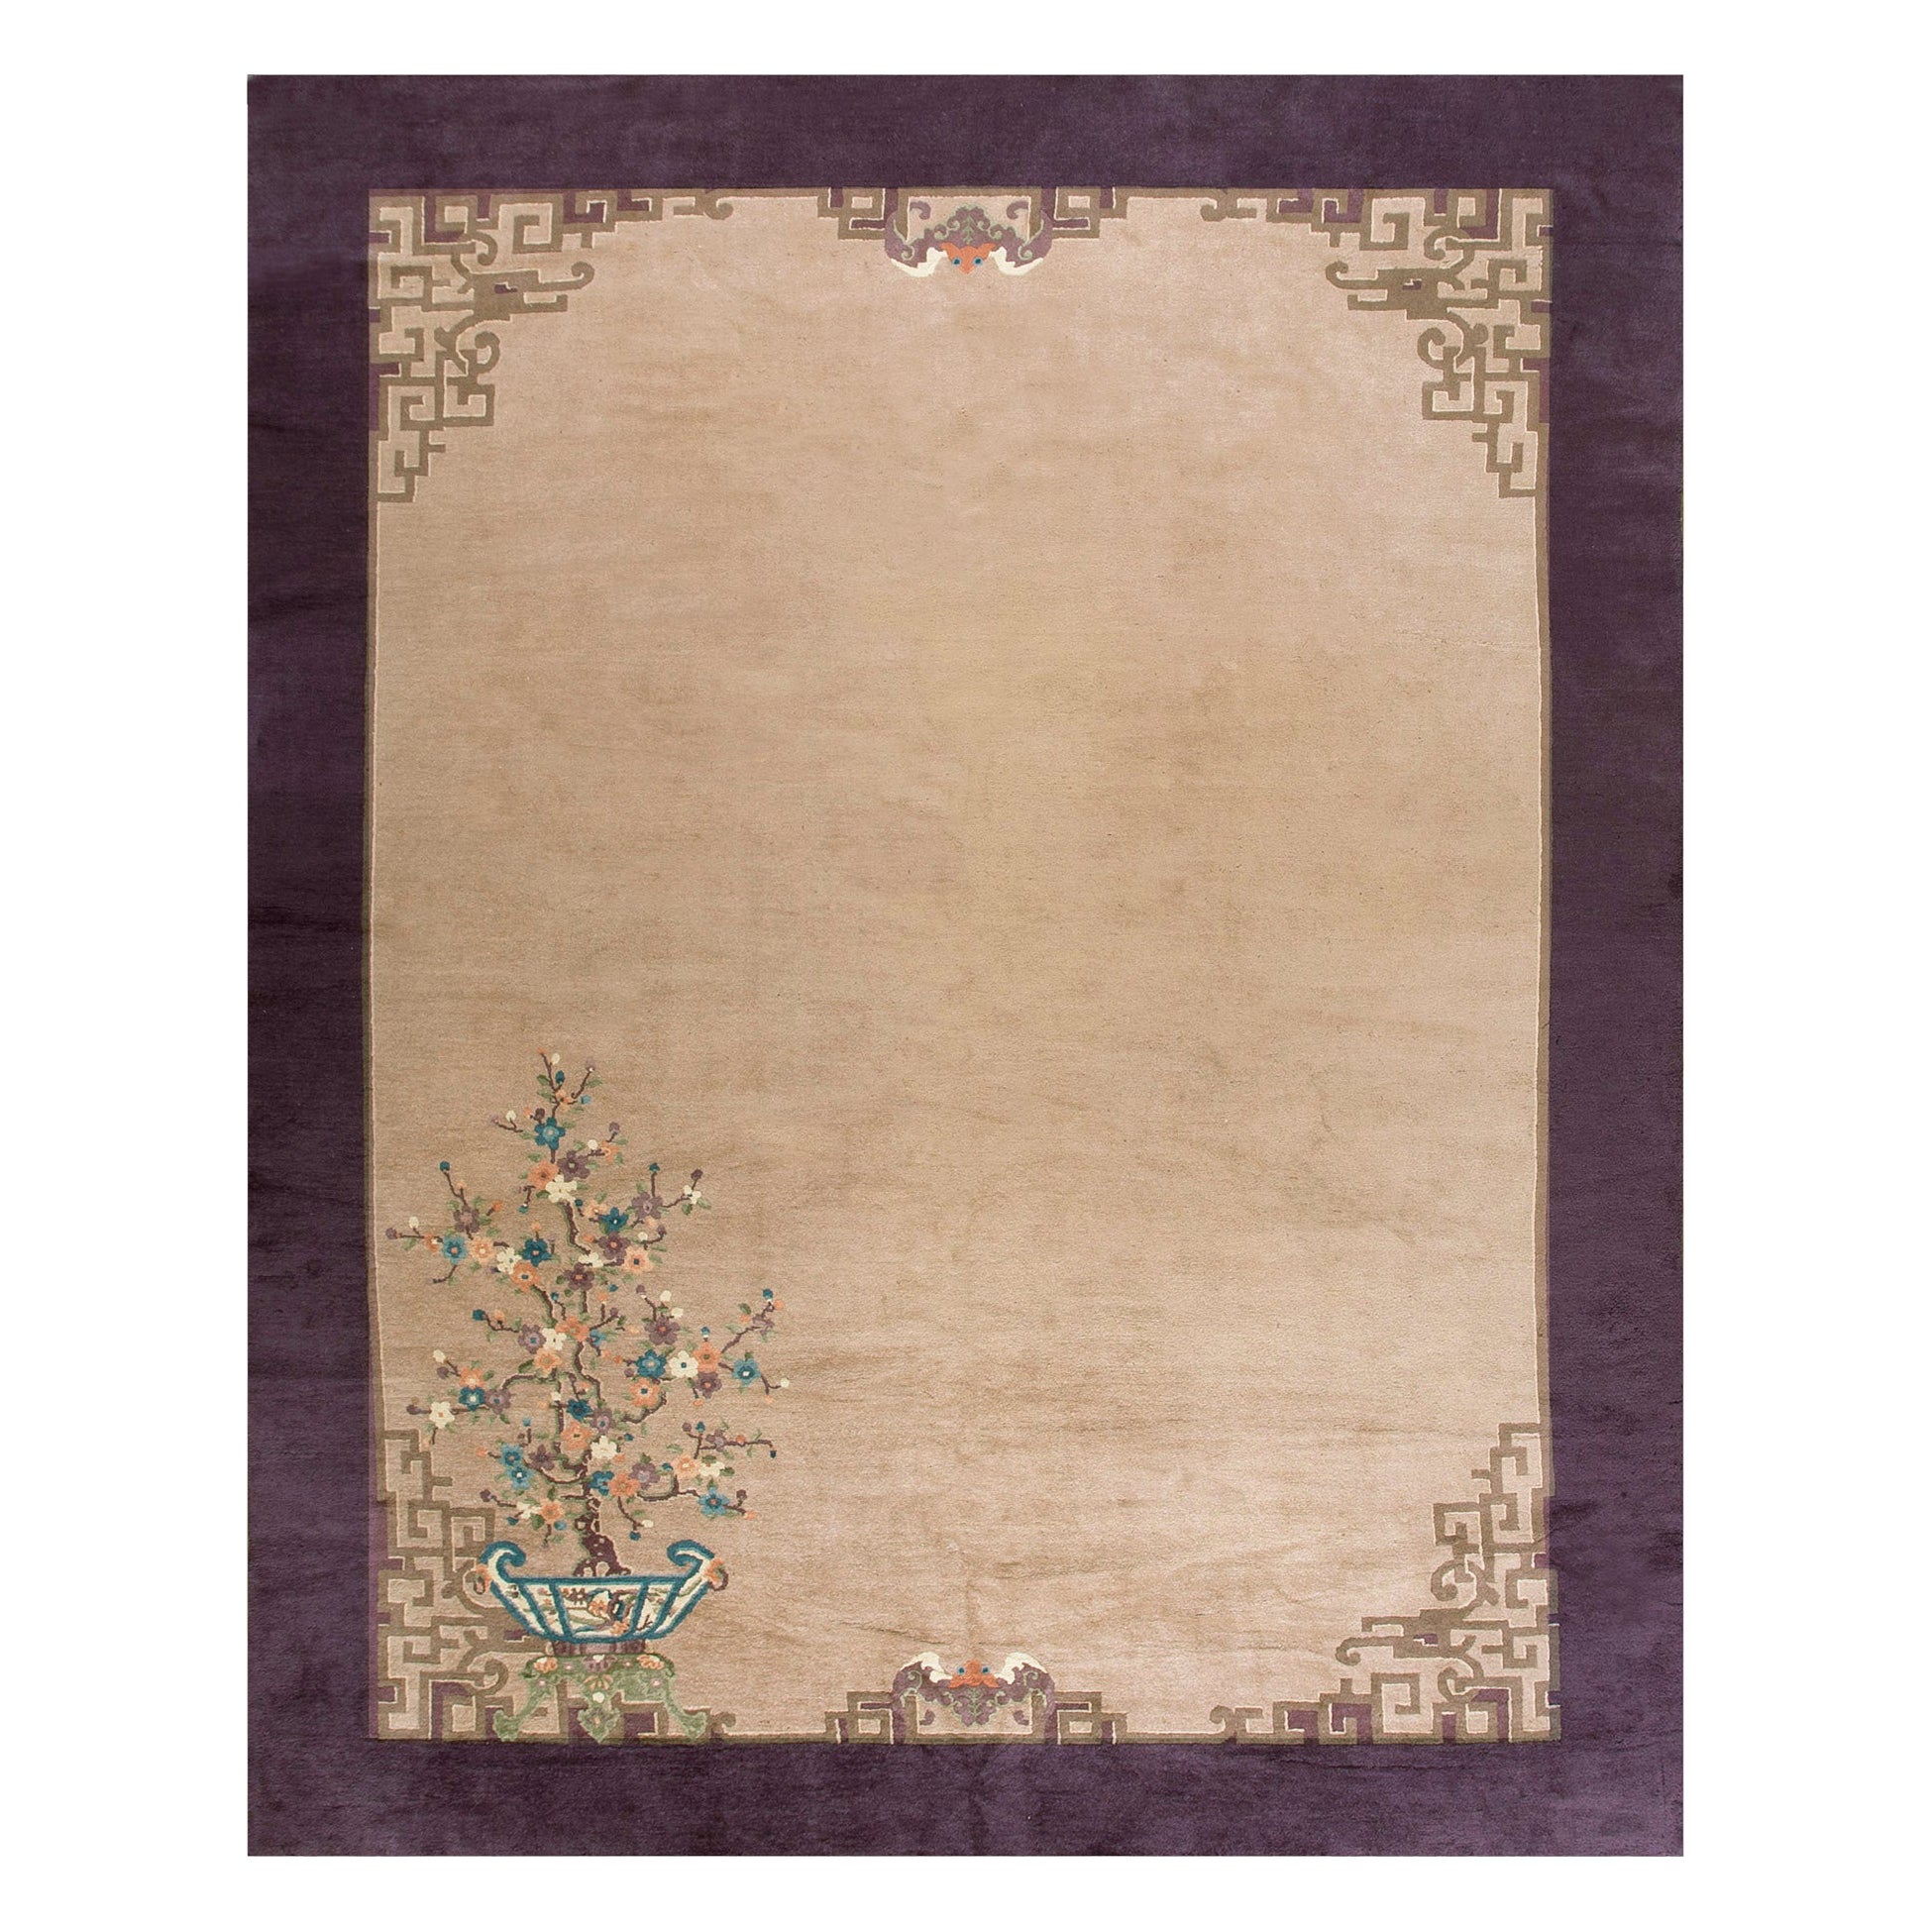 1920s Chinese Art Deco Carpet ( 9'3'' x 11'8'' - 282 x 282 x 355 ) For Sale